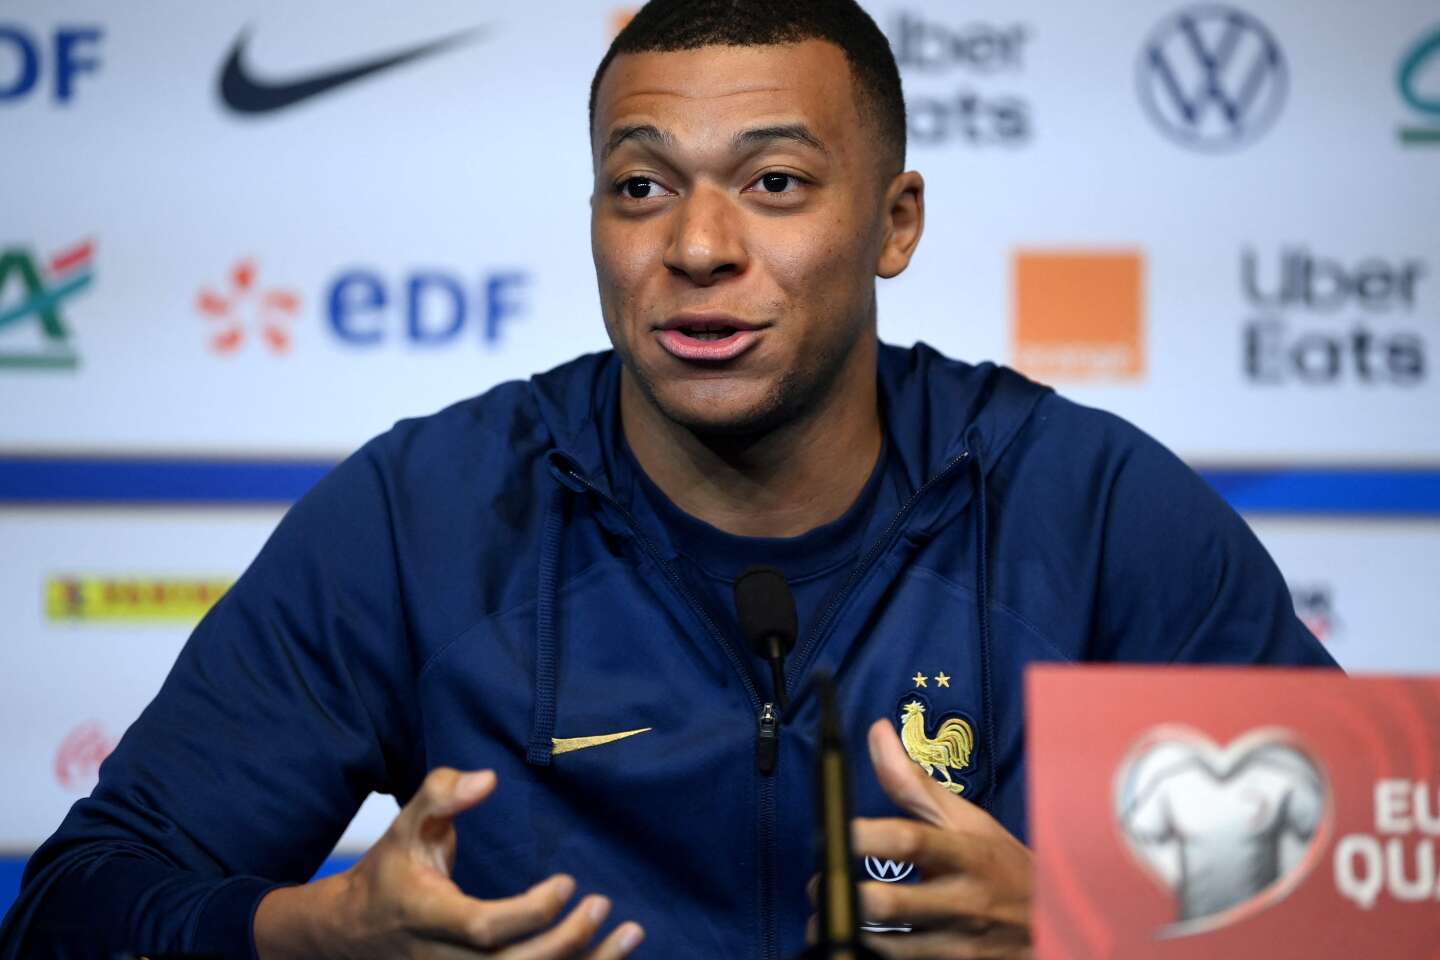 Netherlands: “I’m not going to transform myself”, Kylian Mbappé inaugurates his stripes as captain of the Blues